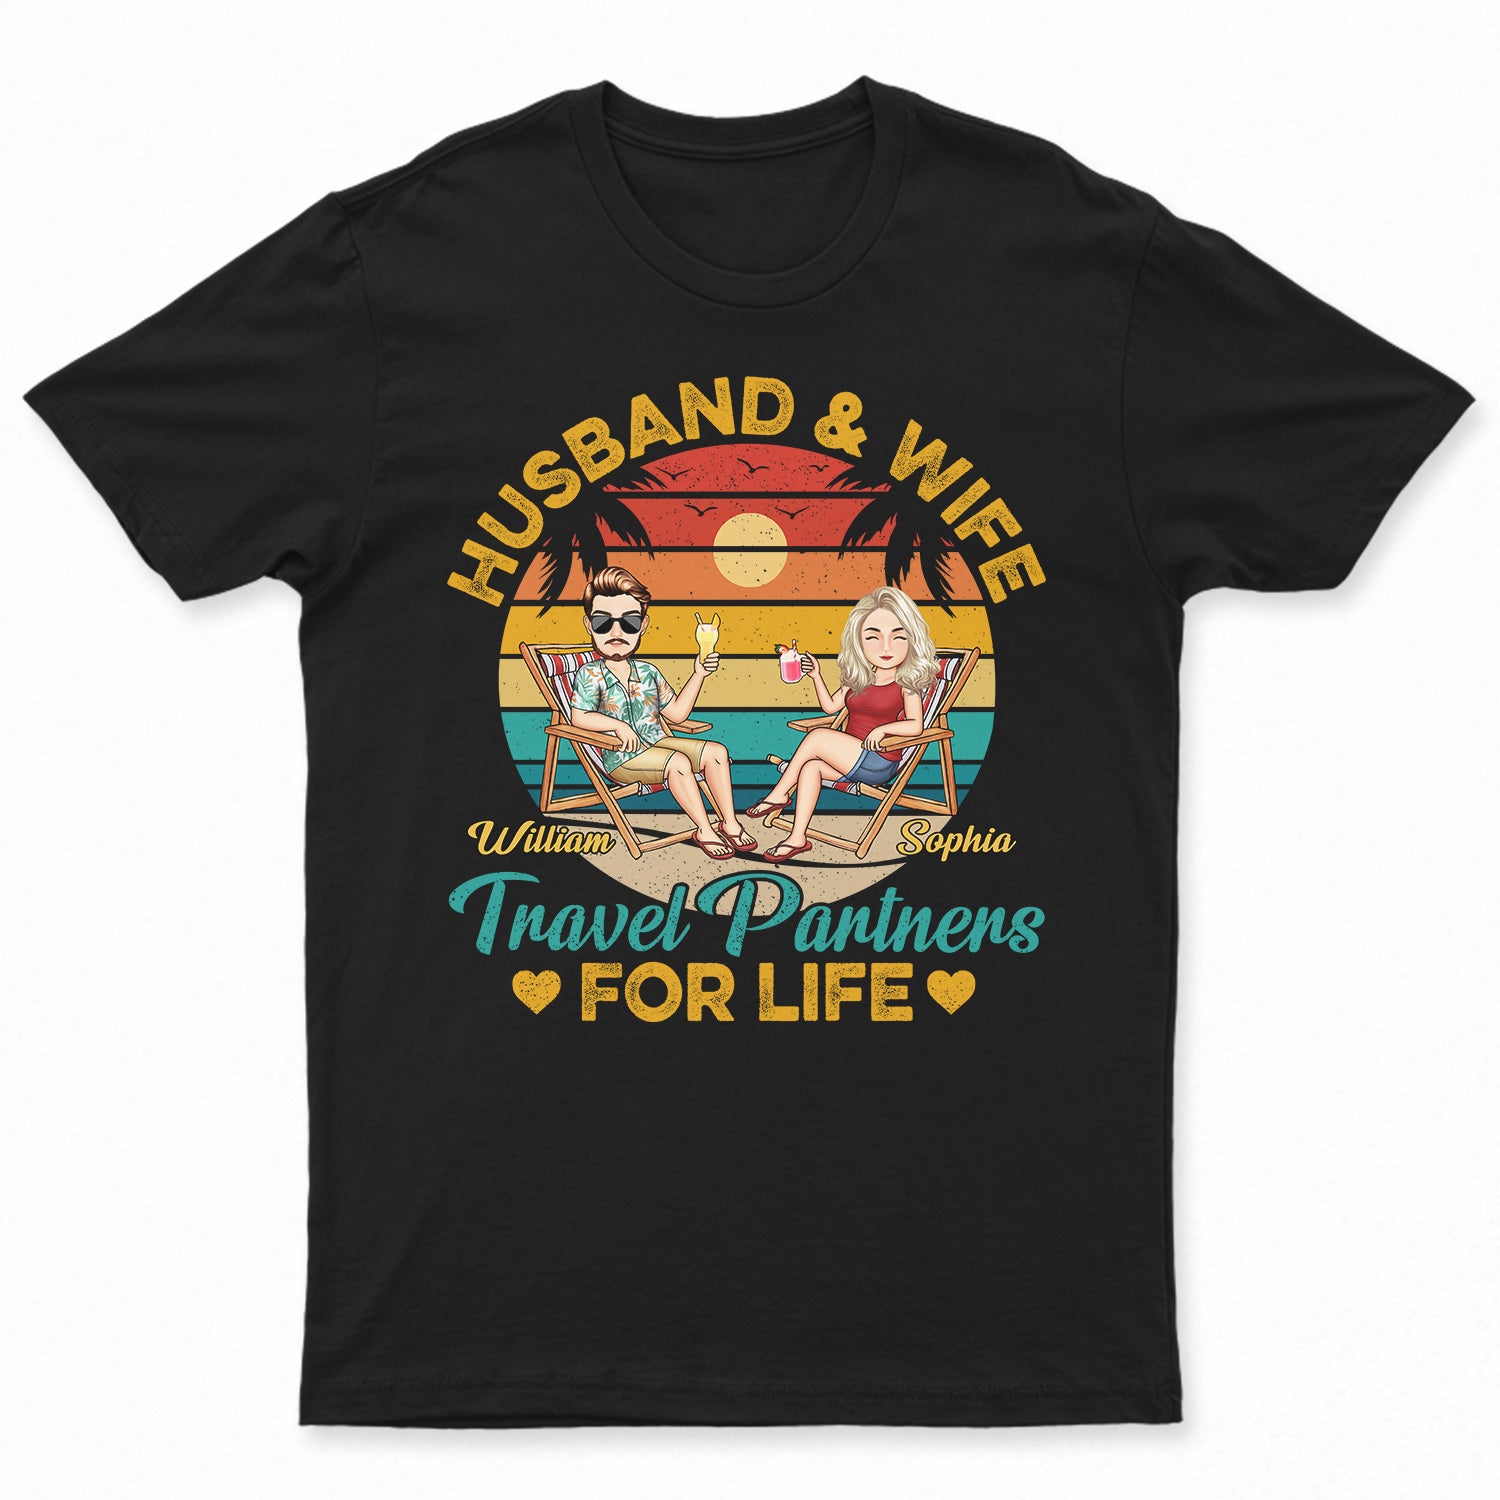 Husband And Wife Travel Partners For Life Beach Traveling Couples Cartoon - Anniversary, Birthday Gift For Spouse, Boyfriend, Girlfriend - Personalized Custom T Shirt